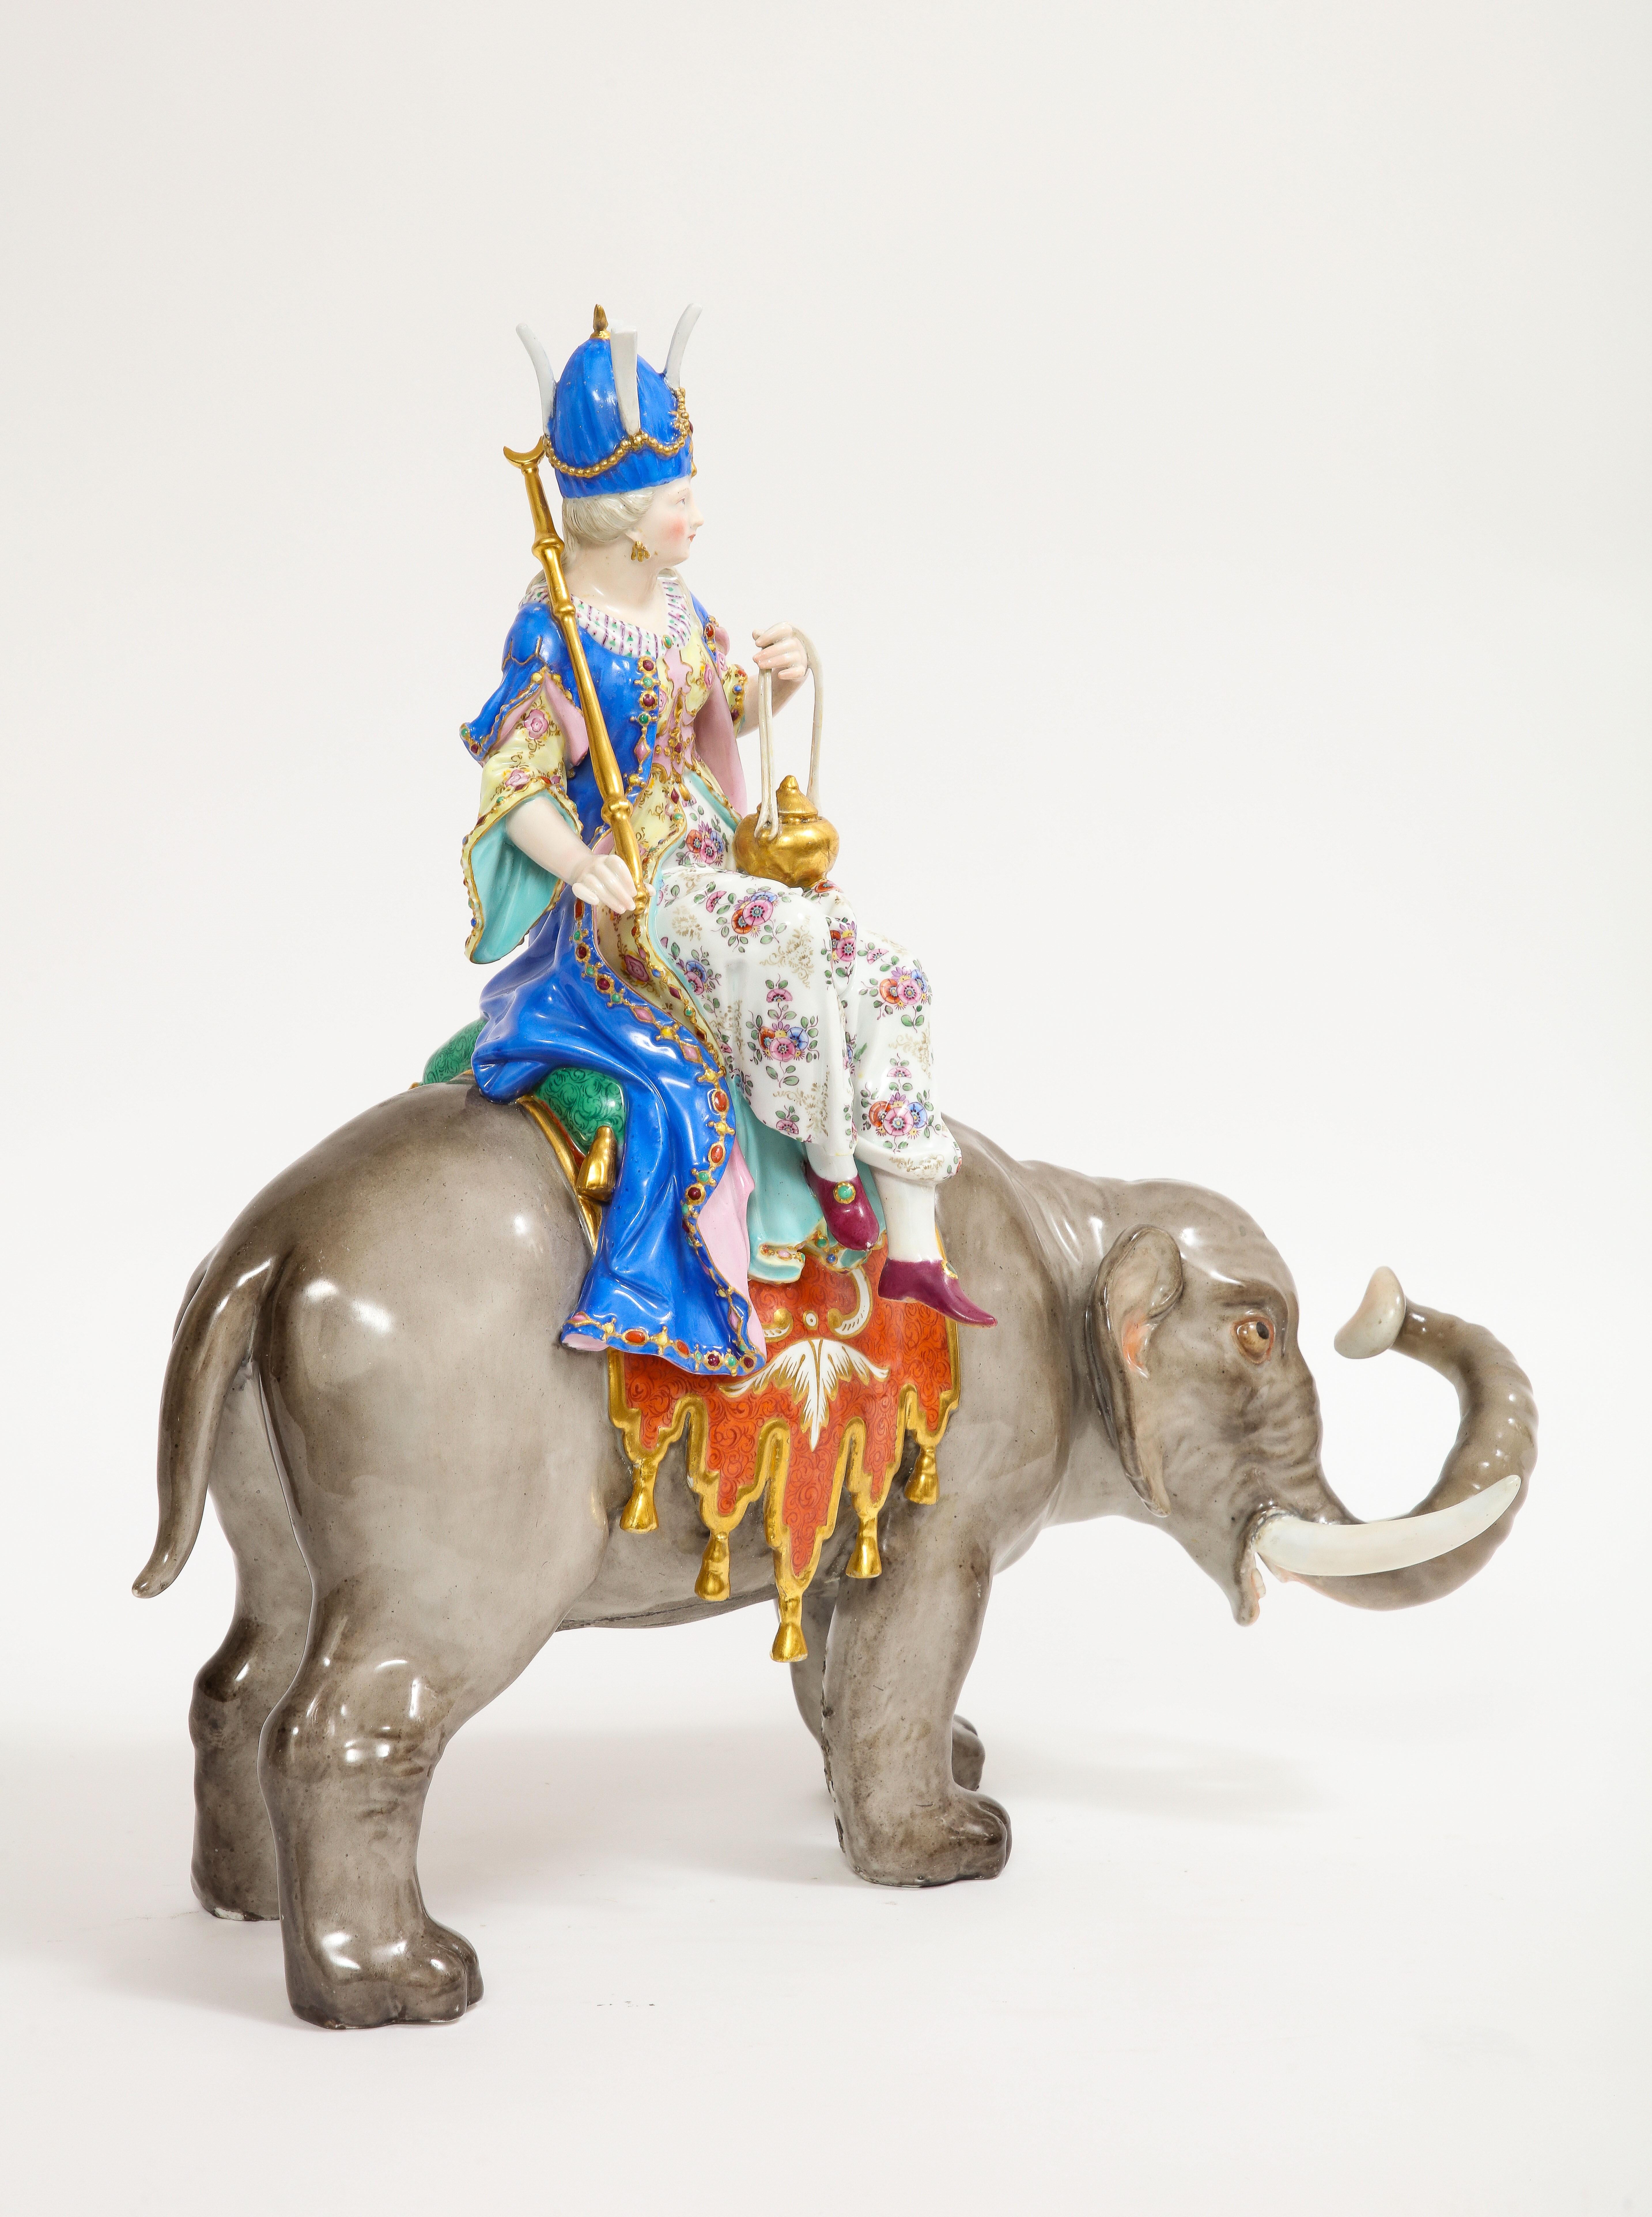 German 19th C. Meissen Porcelain Figure of a Sultana Riding an Elephant with a Crown For Sale